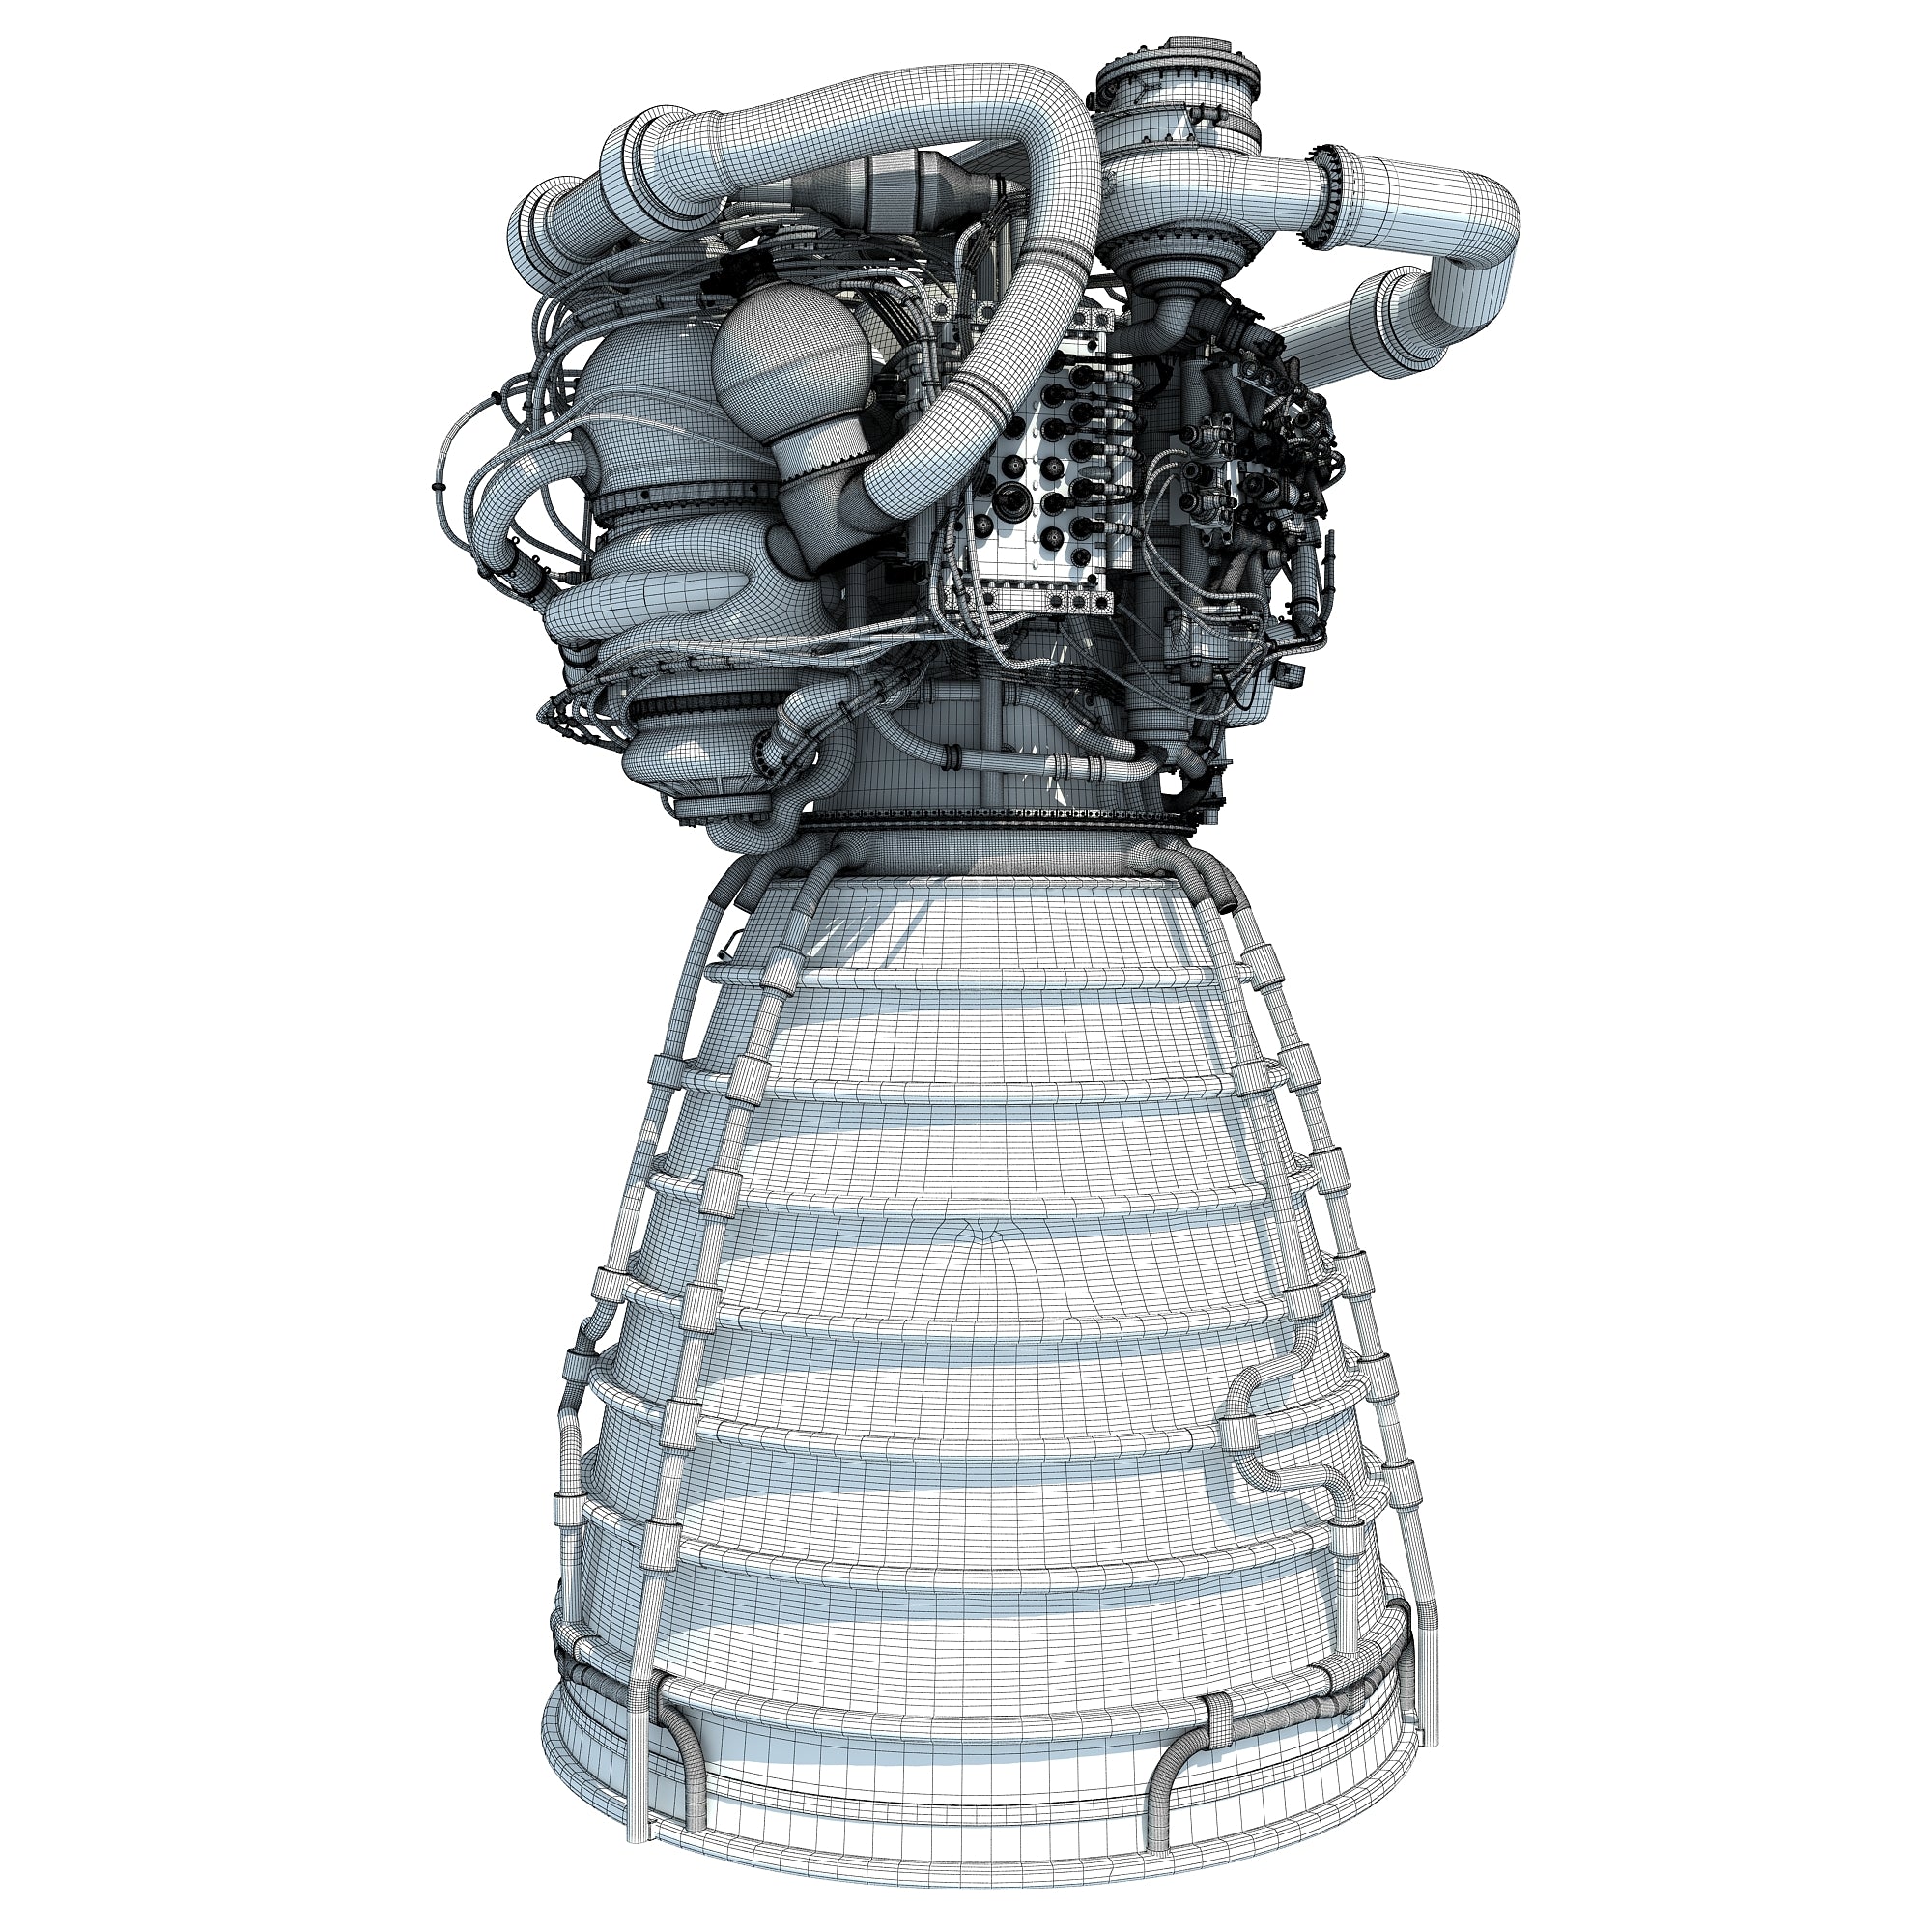 space shuttle engines